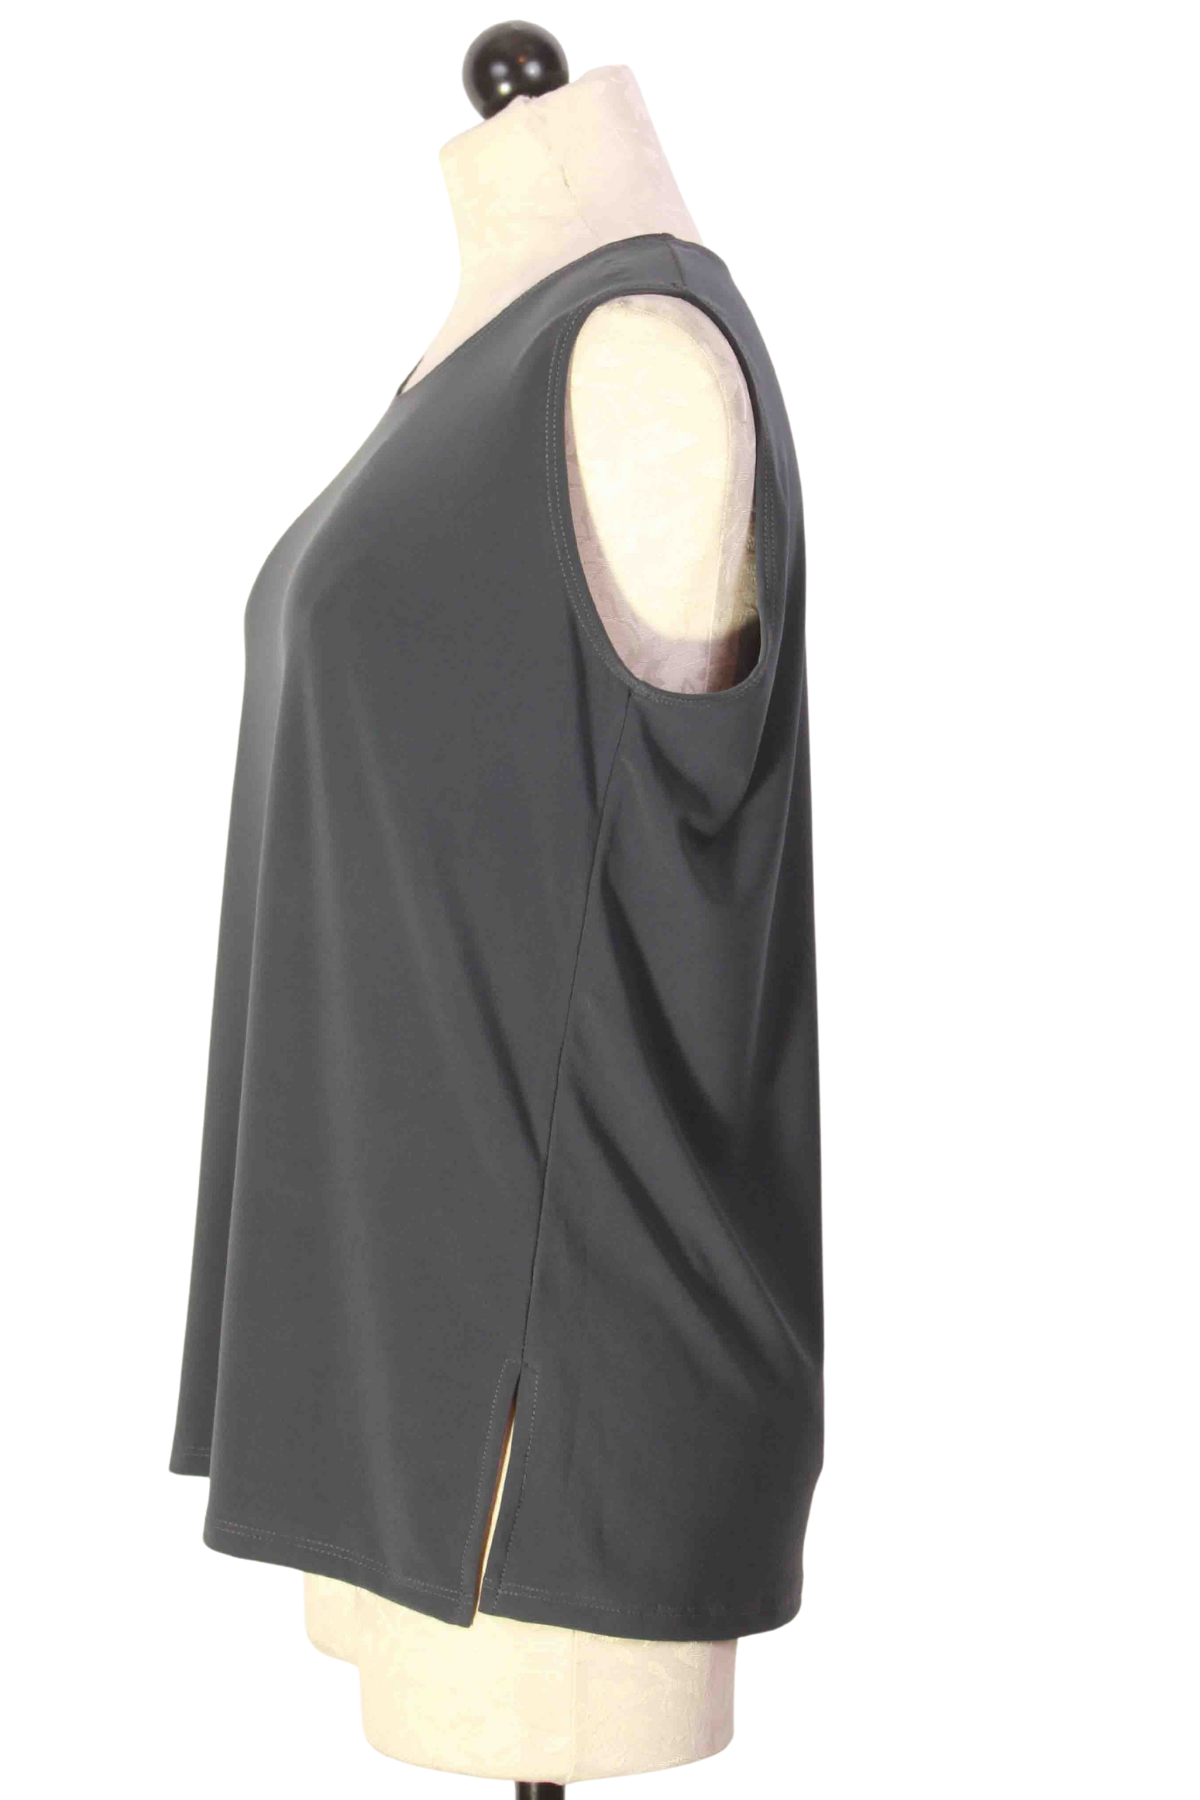 side view of Basic Grey Tank Top by Reina Lee